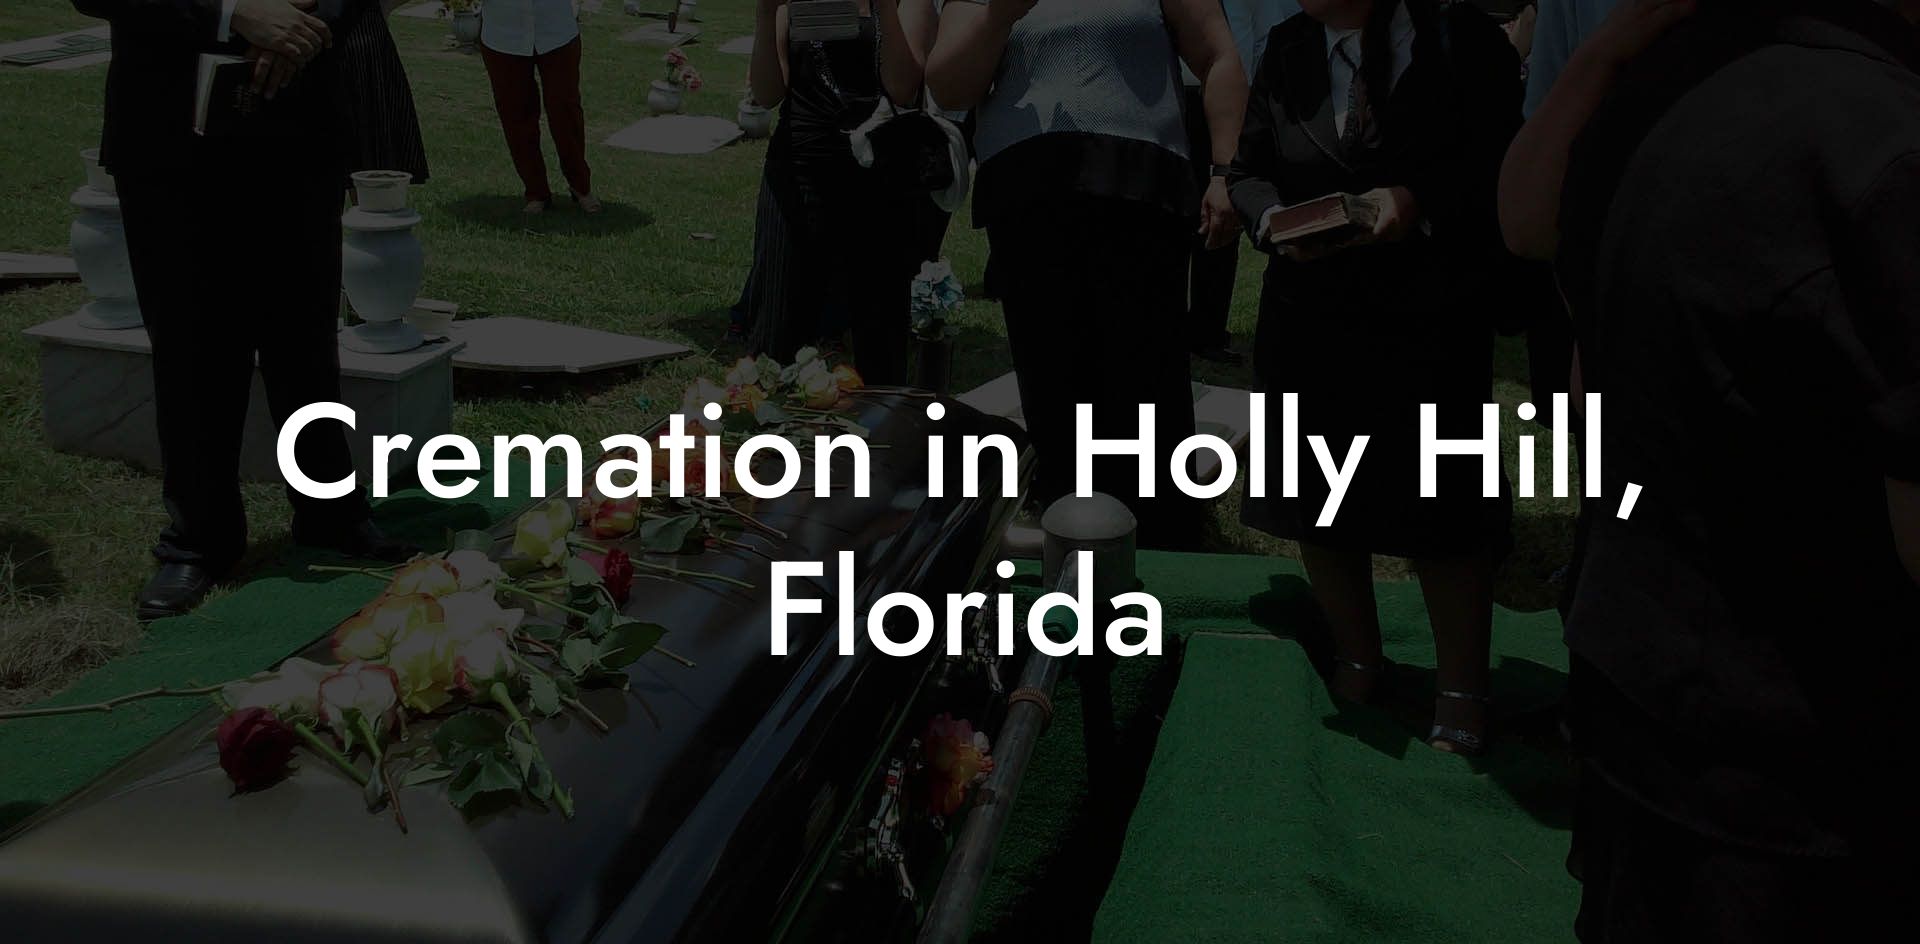 Cremation in Holly Hill, Florida